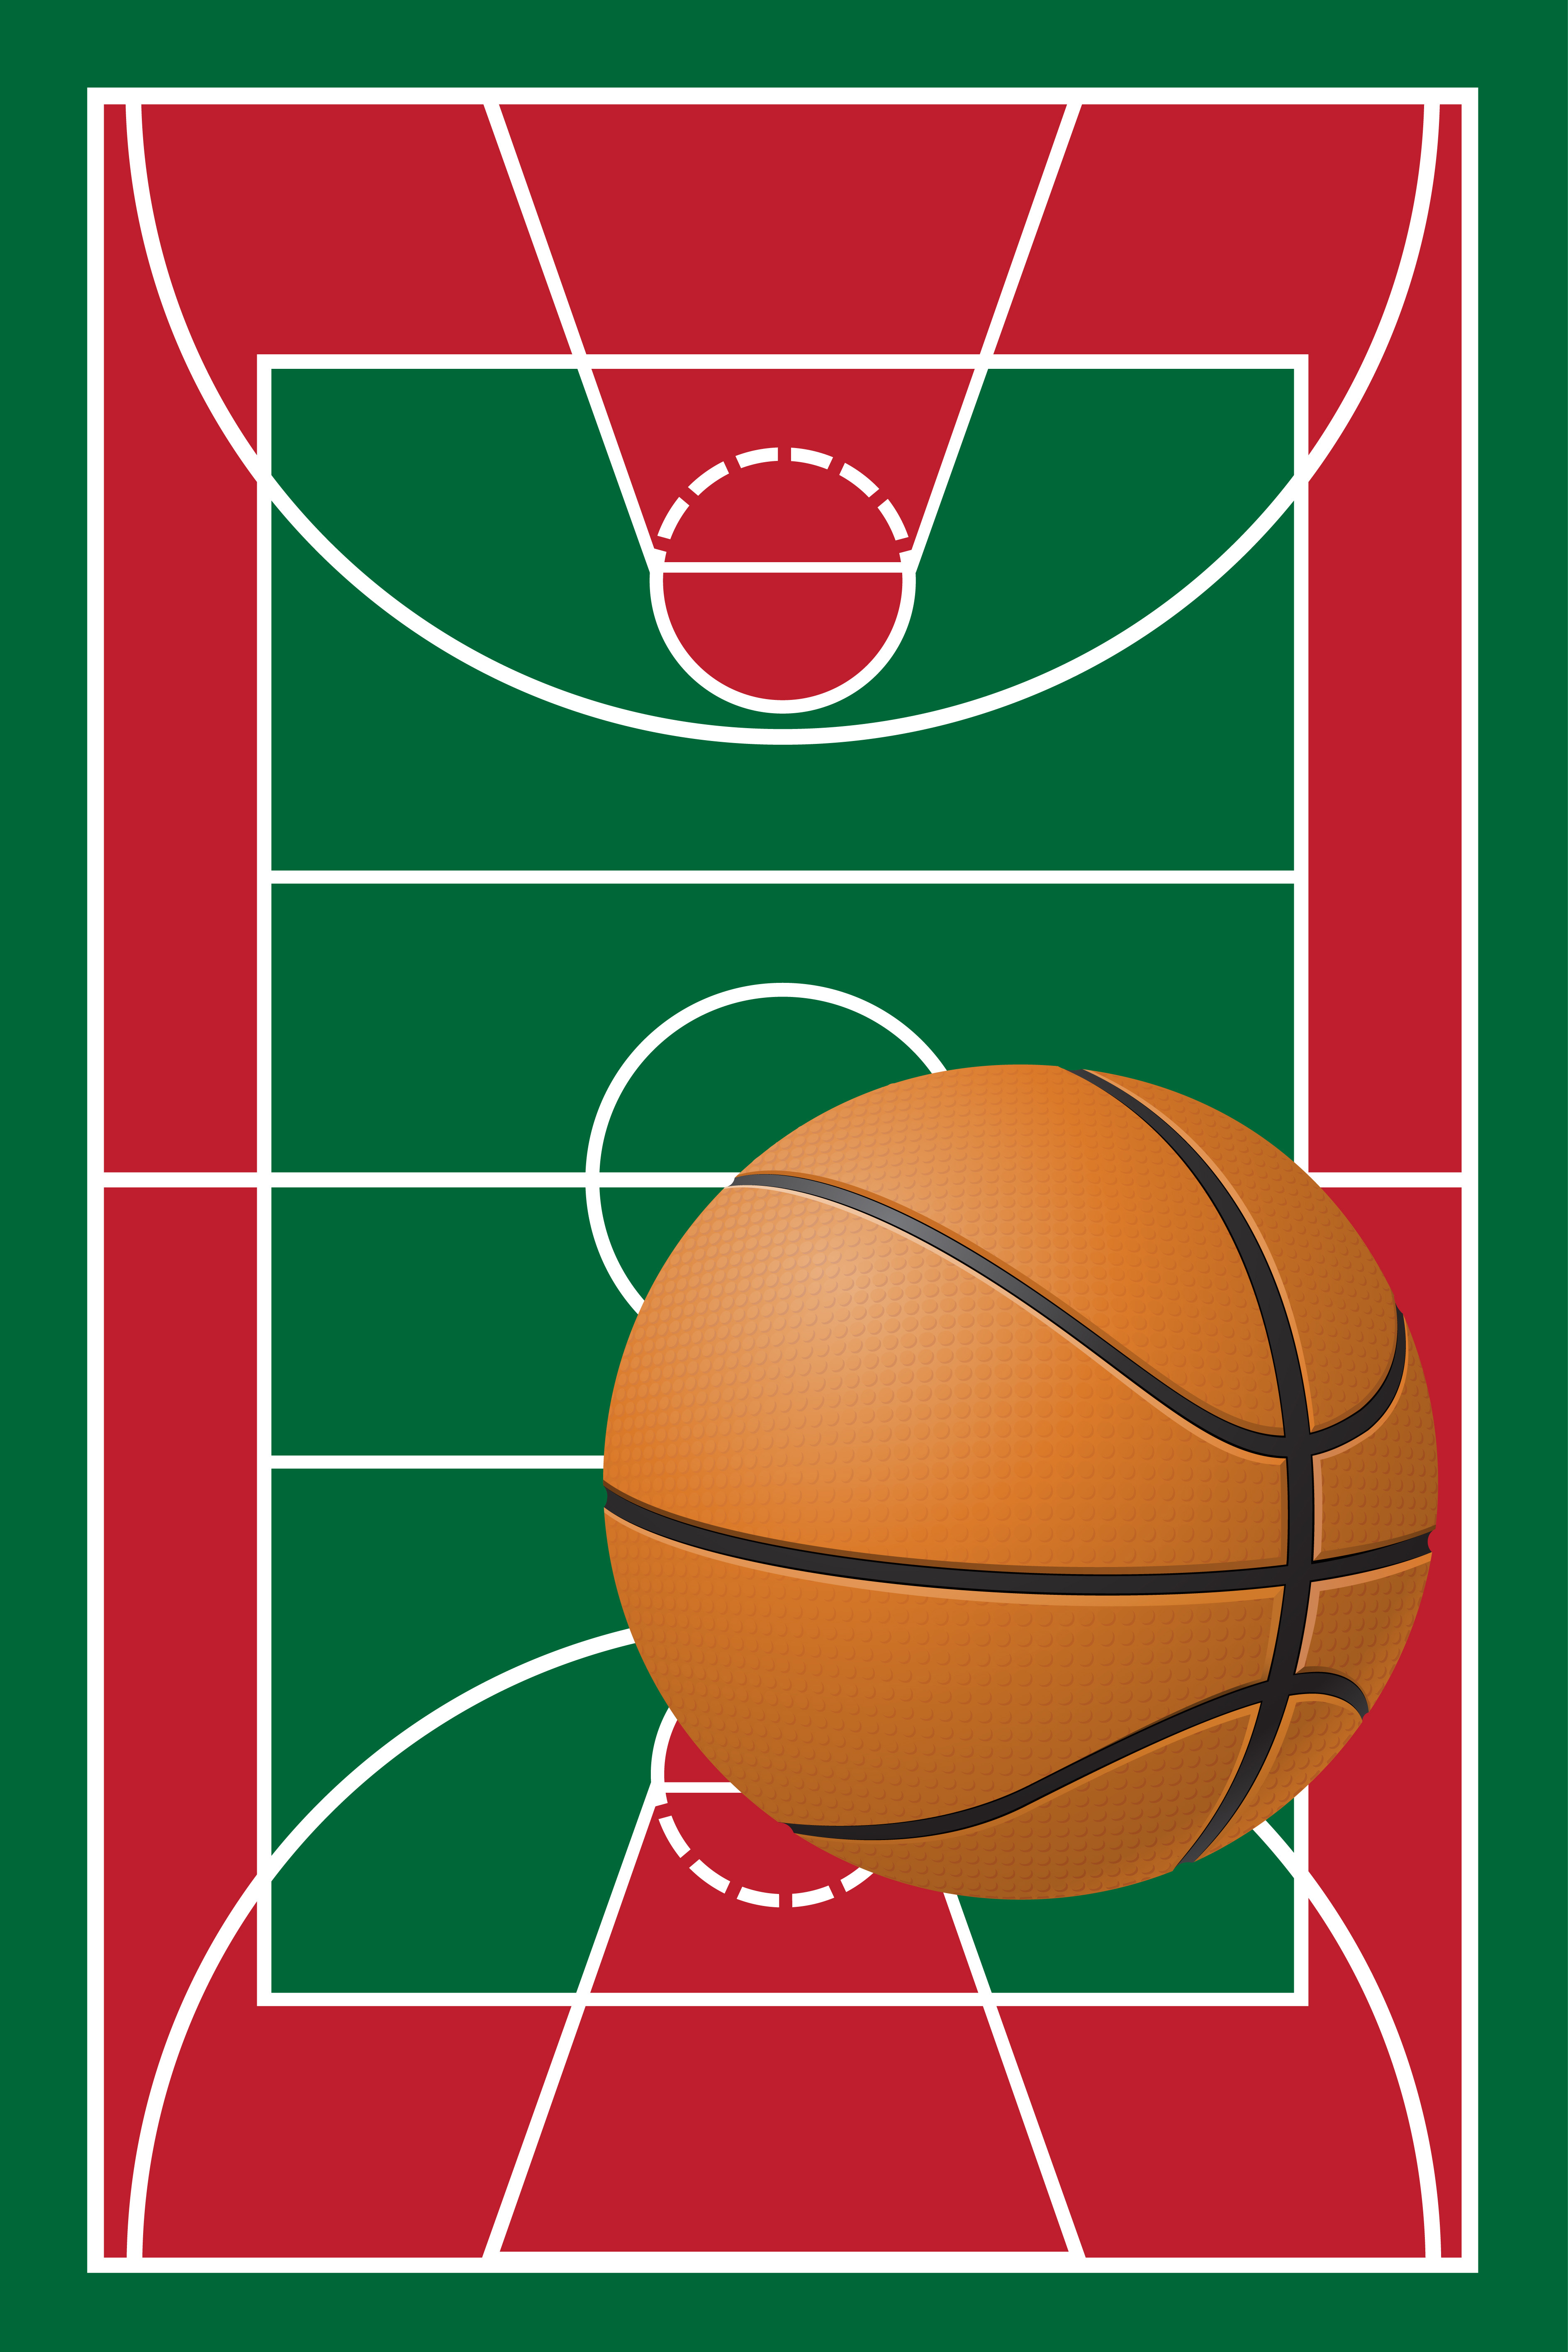 basketball court and ball 488881 - Download Free Vectors ...